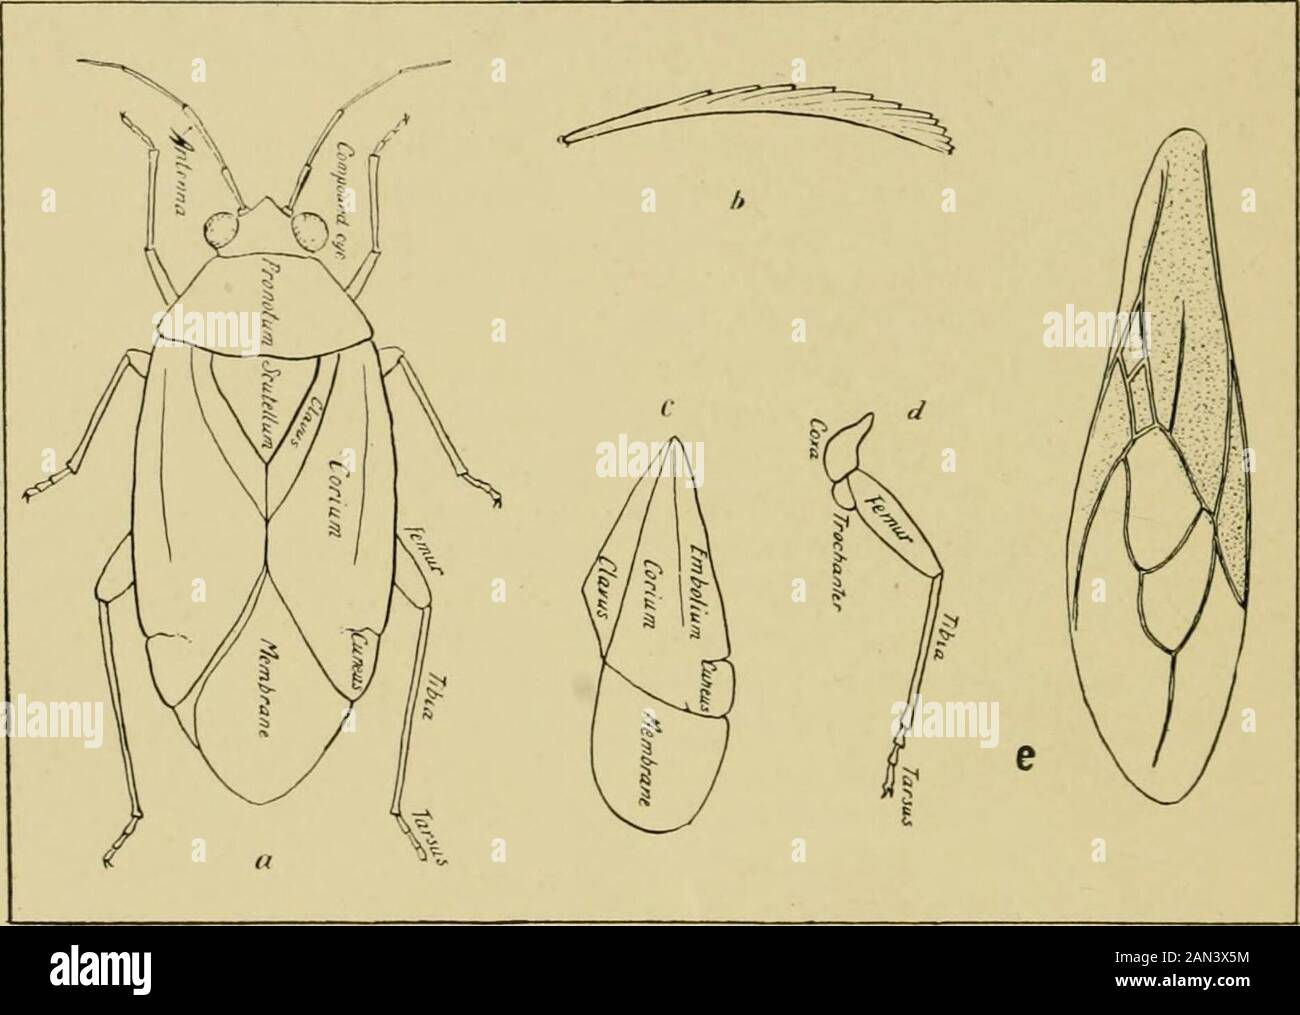 Handbook of medical entomology . t one to five closely crowded, thus the stigmata of seg-ments three to five apparently lying in one segment; segmentsfive to eight with lateral processes; telson without lateral conical appendages (fig. 69). Crab louse of man Phthirus pubis. 276 Hominoxious Arthropods dd. Eyes indistinct or wanting; pharyftx long and slender, fulturae very-slender and closely applied to the pharynx; proboscis very long. Several genera found upon various mammals HiEMATOPiNiD^E. CO. Body swollen; meso- and metathorax, and abdominal segments two toeight each with a pair of stigmat Stock Photo